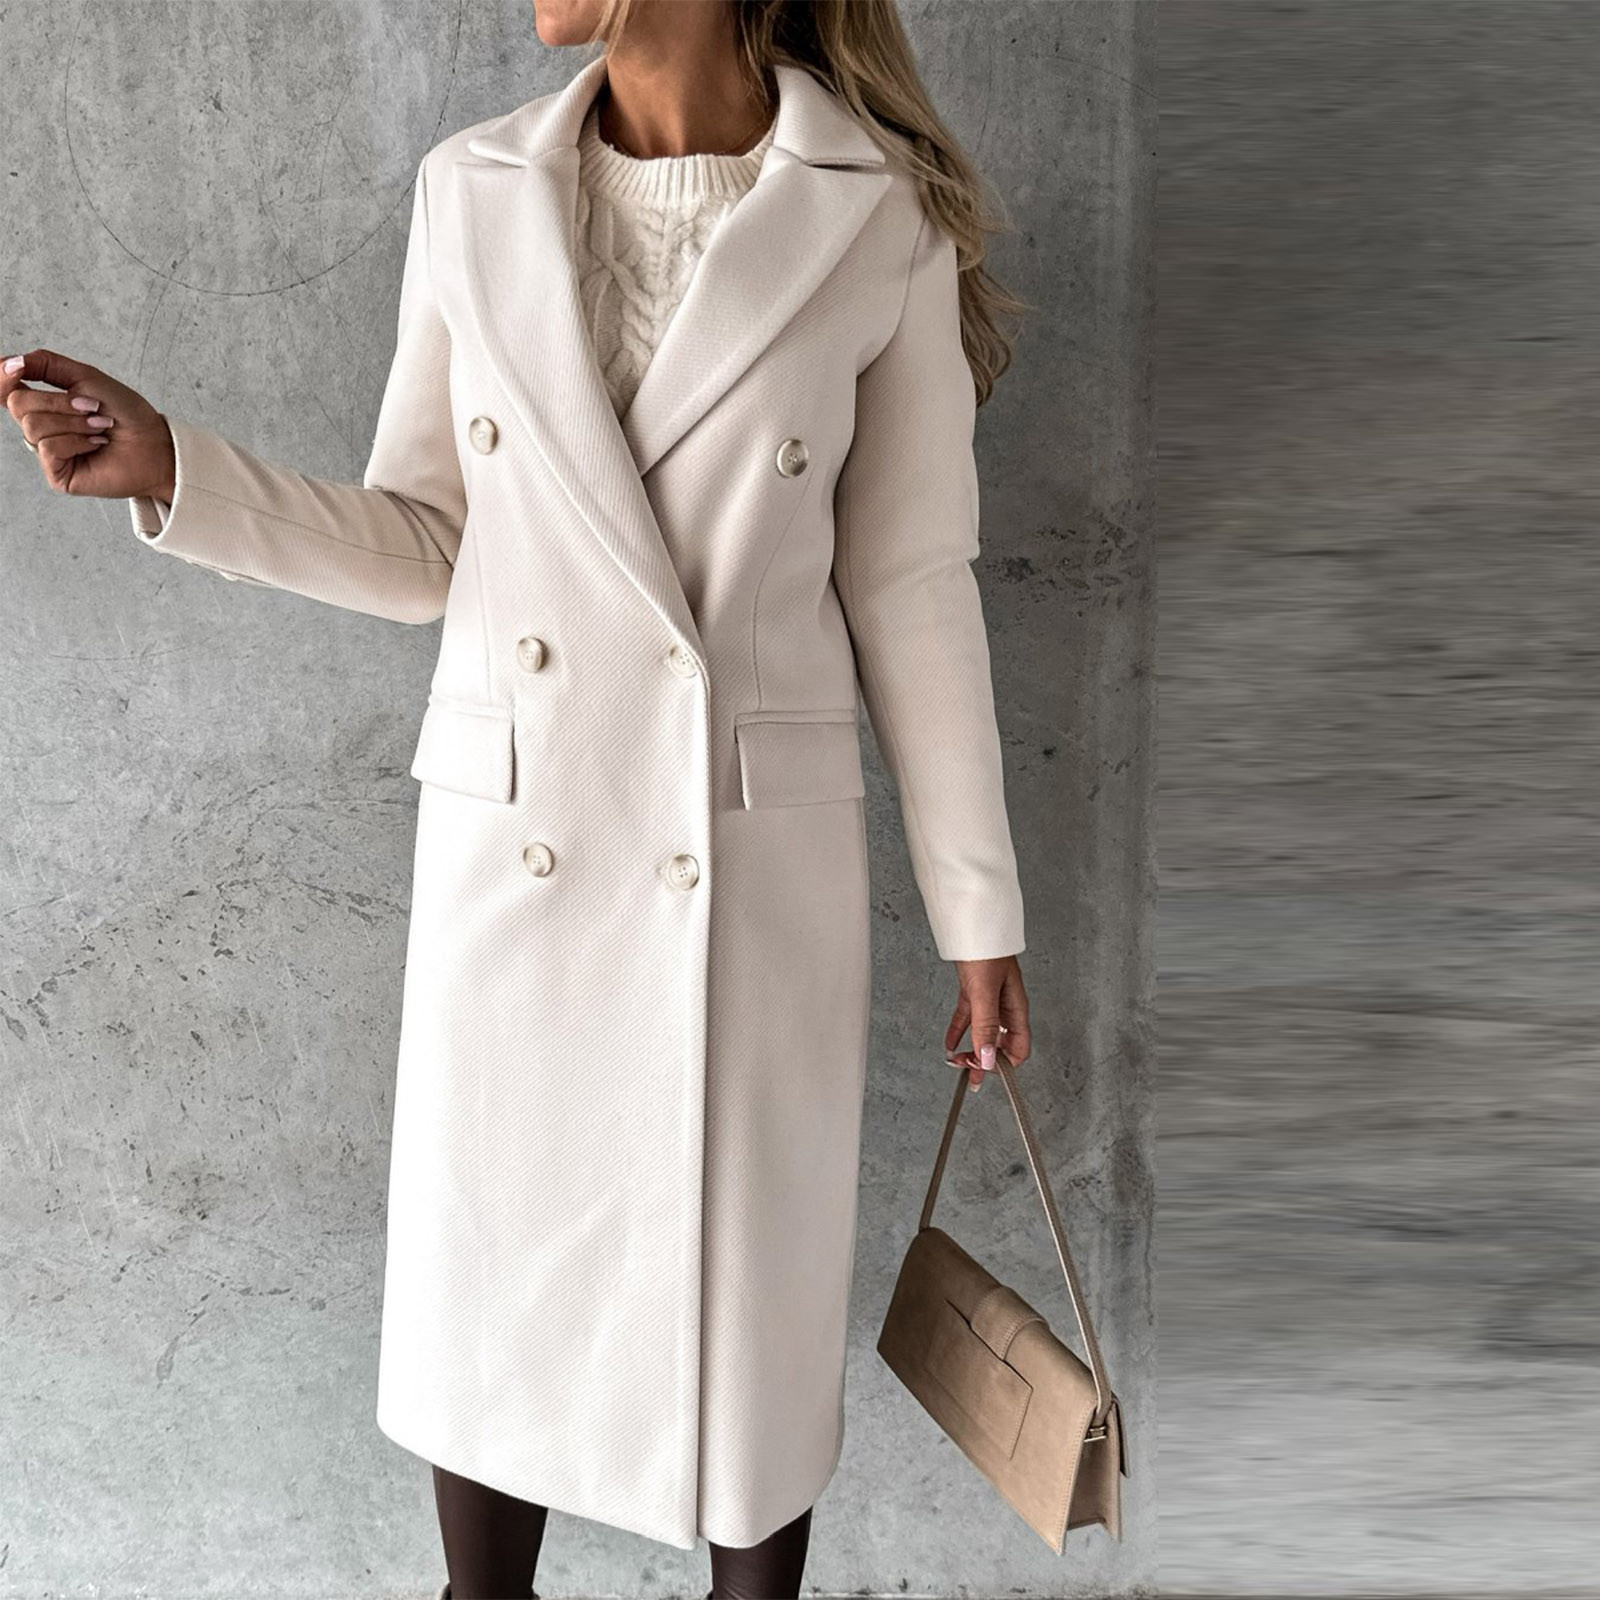 Hfyihgf Women's Double Breasted Trench Coat Classic Notch Collar Long Sleeve Peacoats Winter Warm Slim Fit Long Woolen Jackets Coat with Pockets Clearance(Beige,S) - image 2 of 5